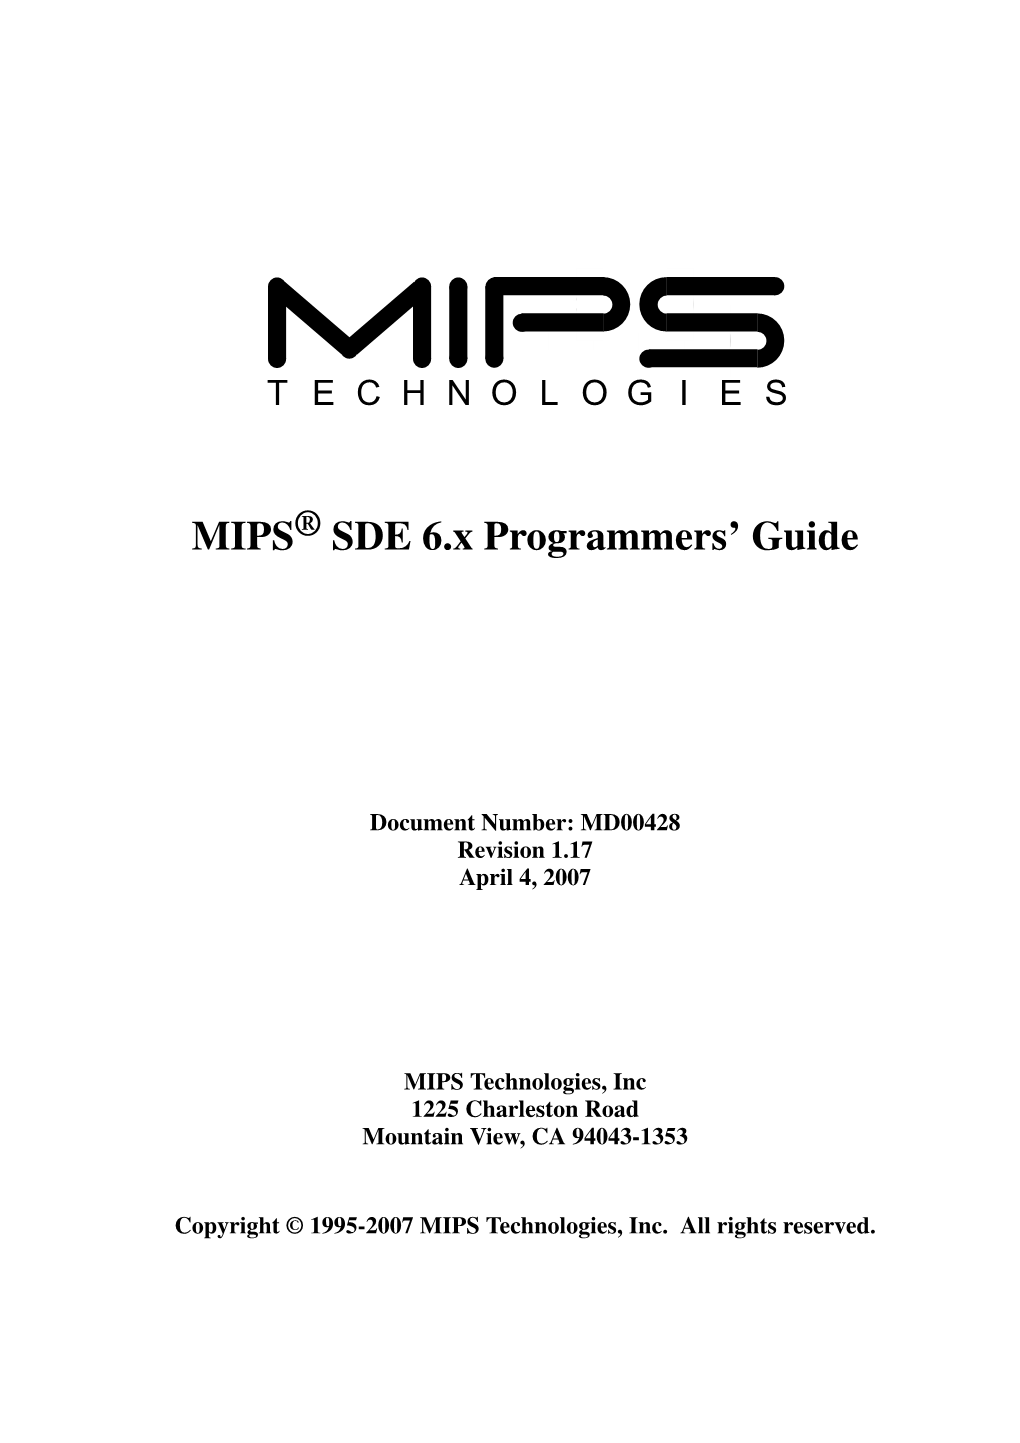 MIPS SDE 6.X Programmers' Guide